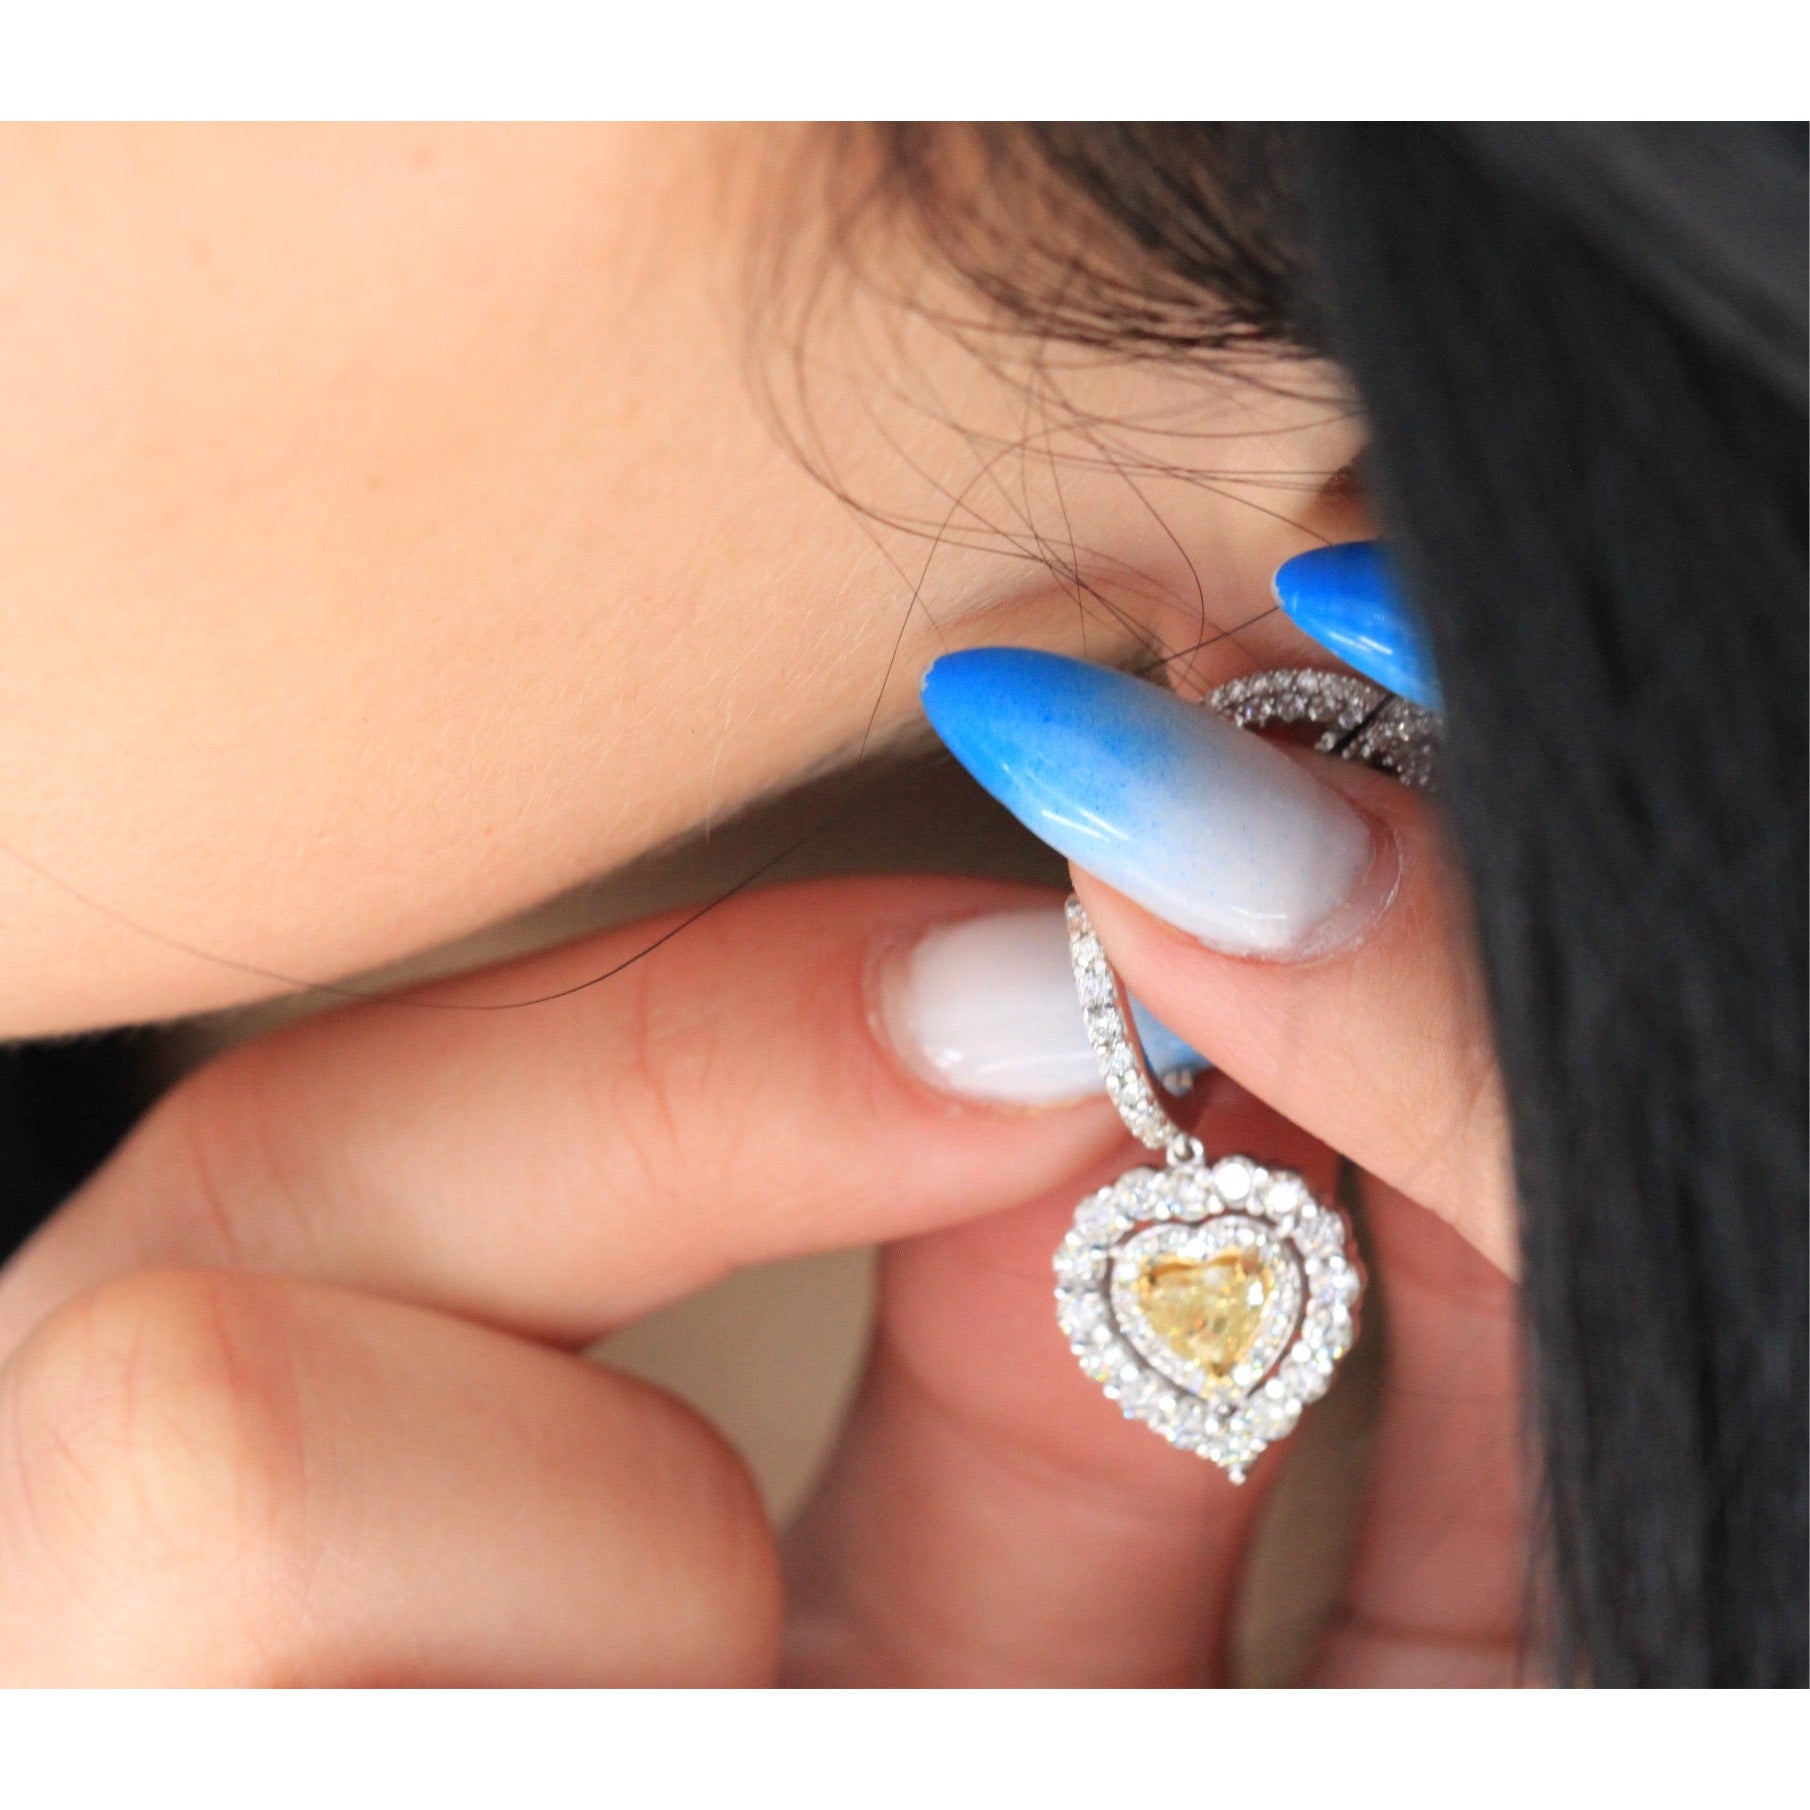 Yellow diamond heart in the double halo has an earring design being put on earlobe with manicured fingertips